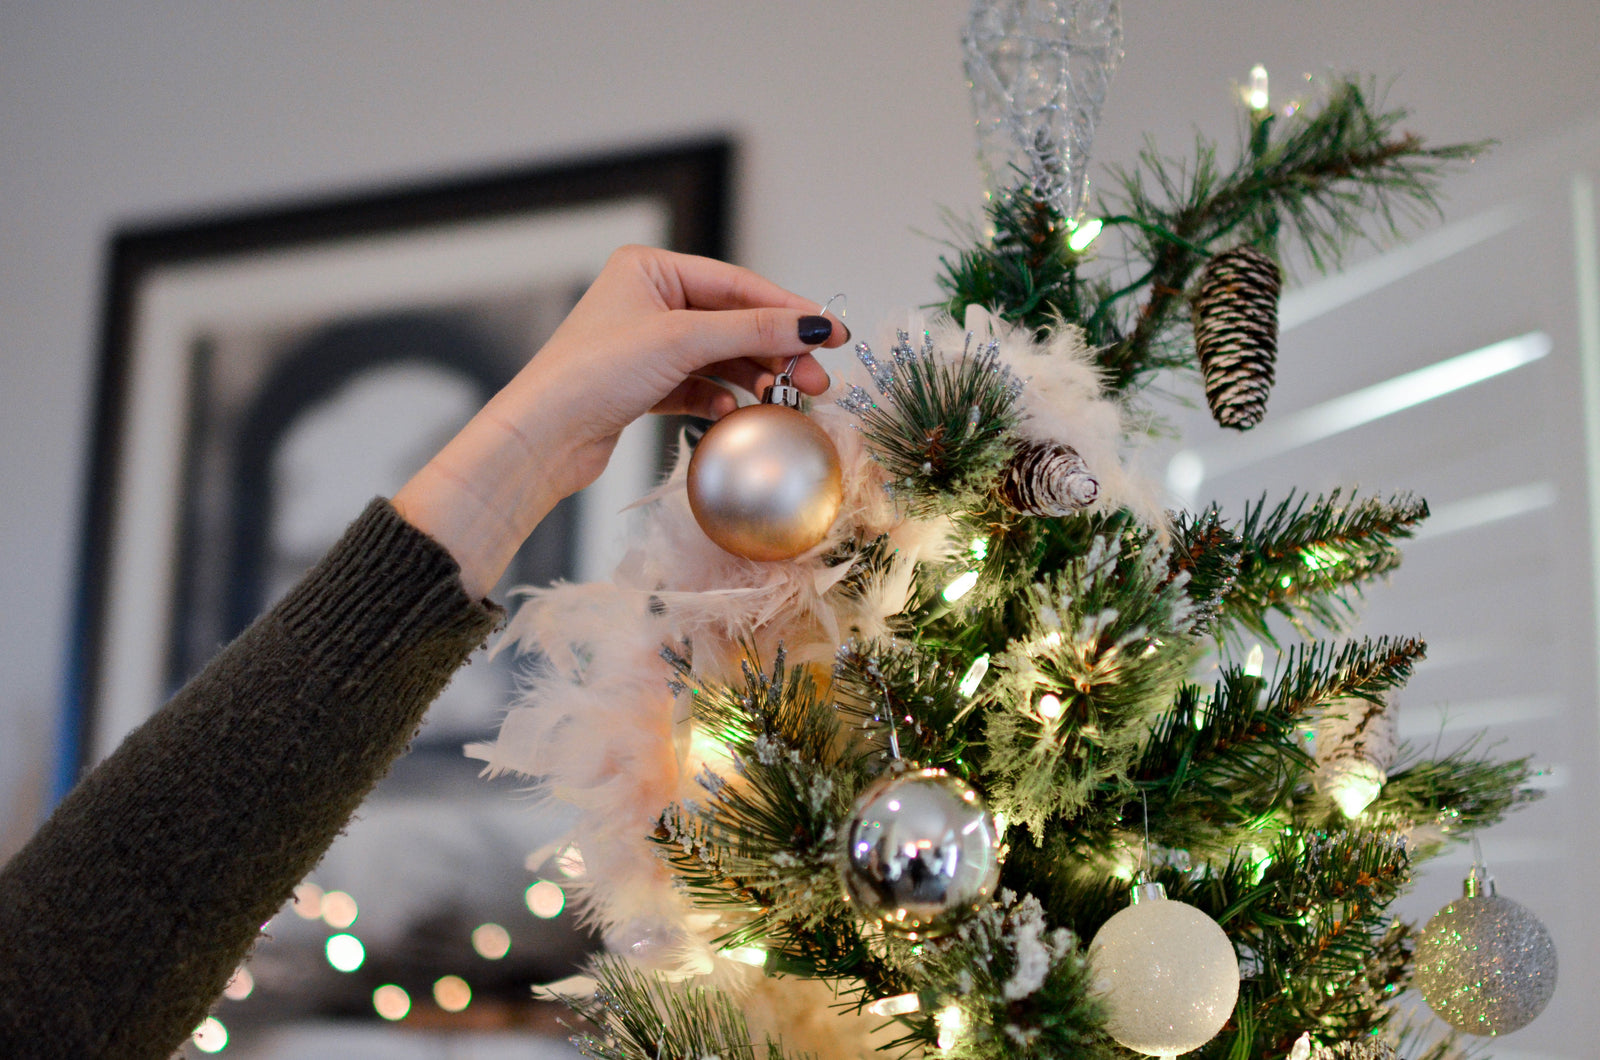 5 Simple DIY Christmas Decorating Ideas For Getting into the Festive Spirit